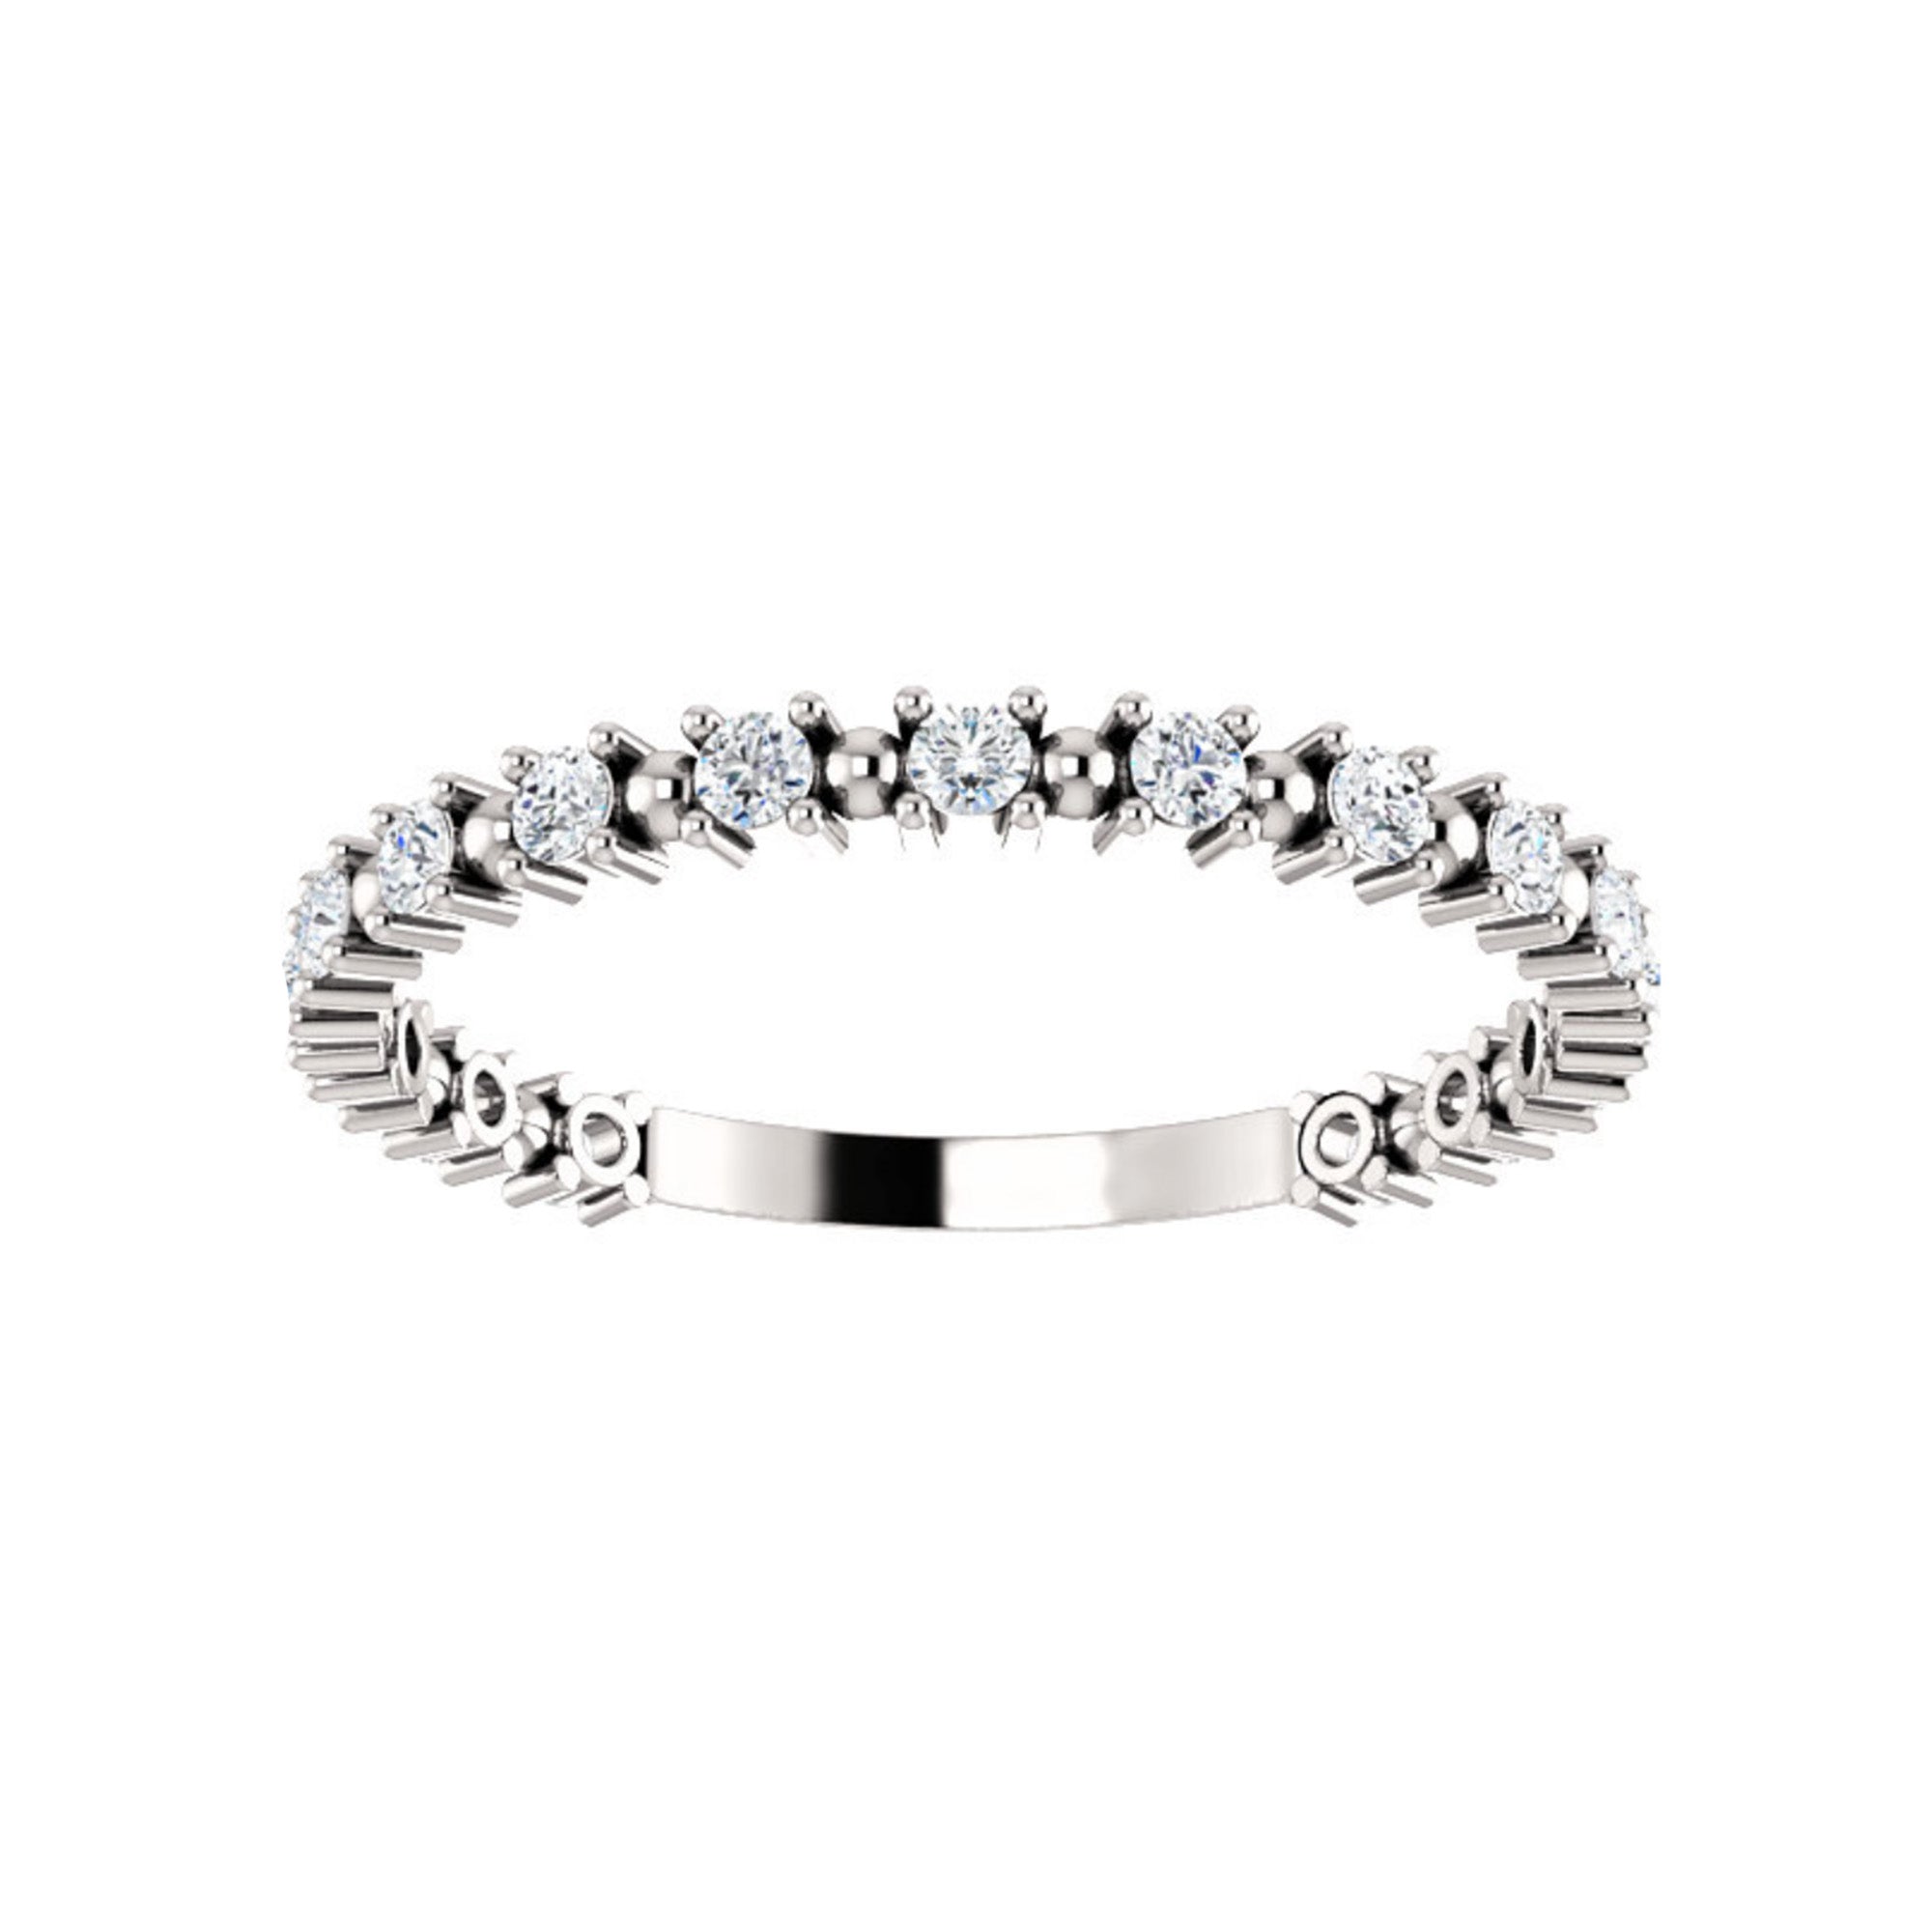 Diamond Beaded Stack Band in White, Yellow or Rose Gold - Talisman Collection Fine Jewelers